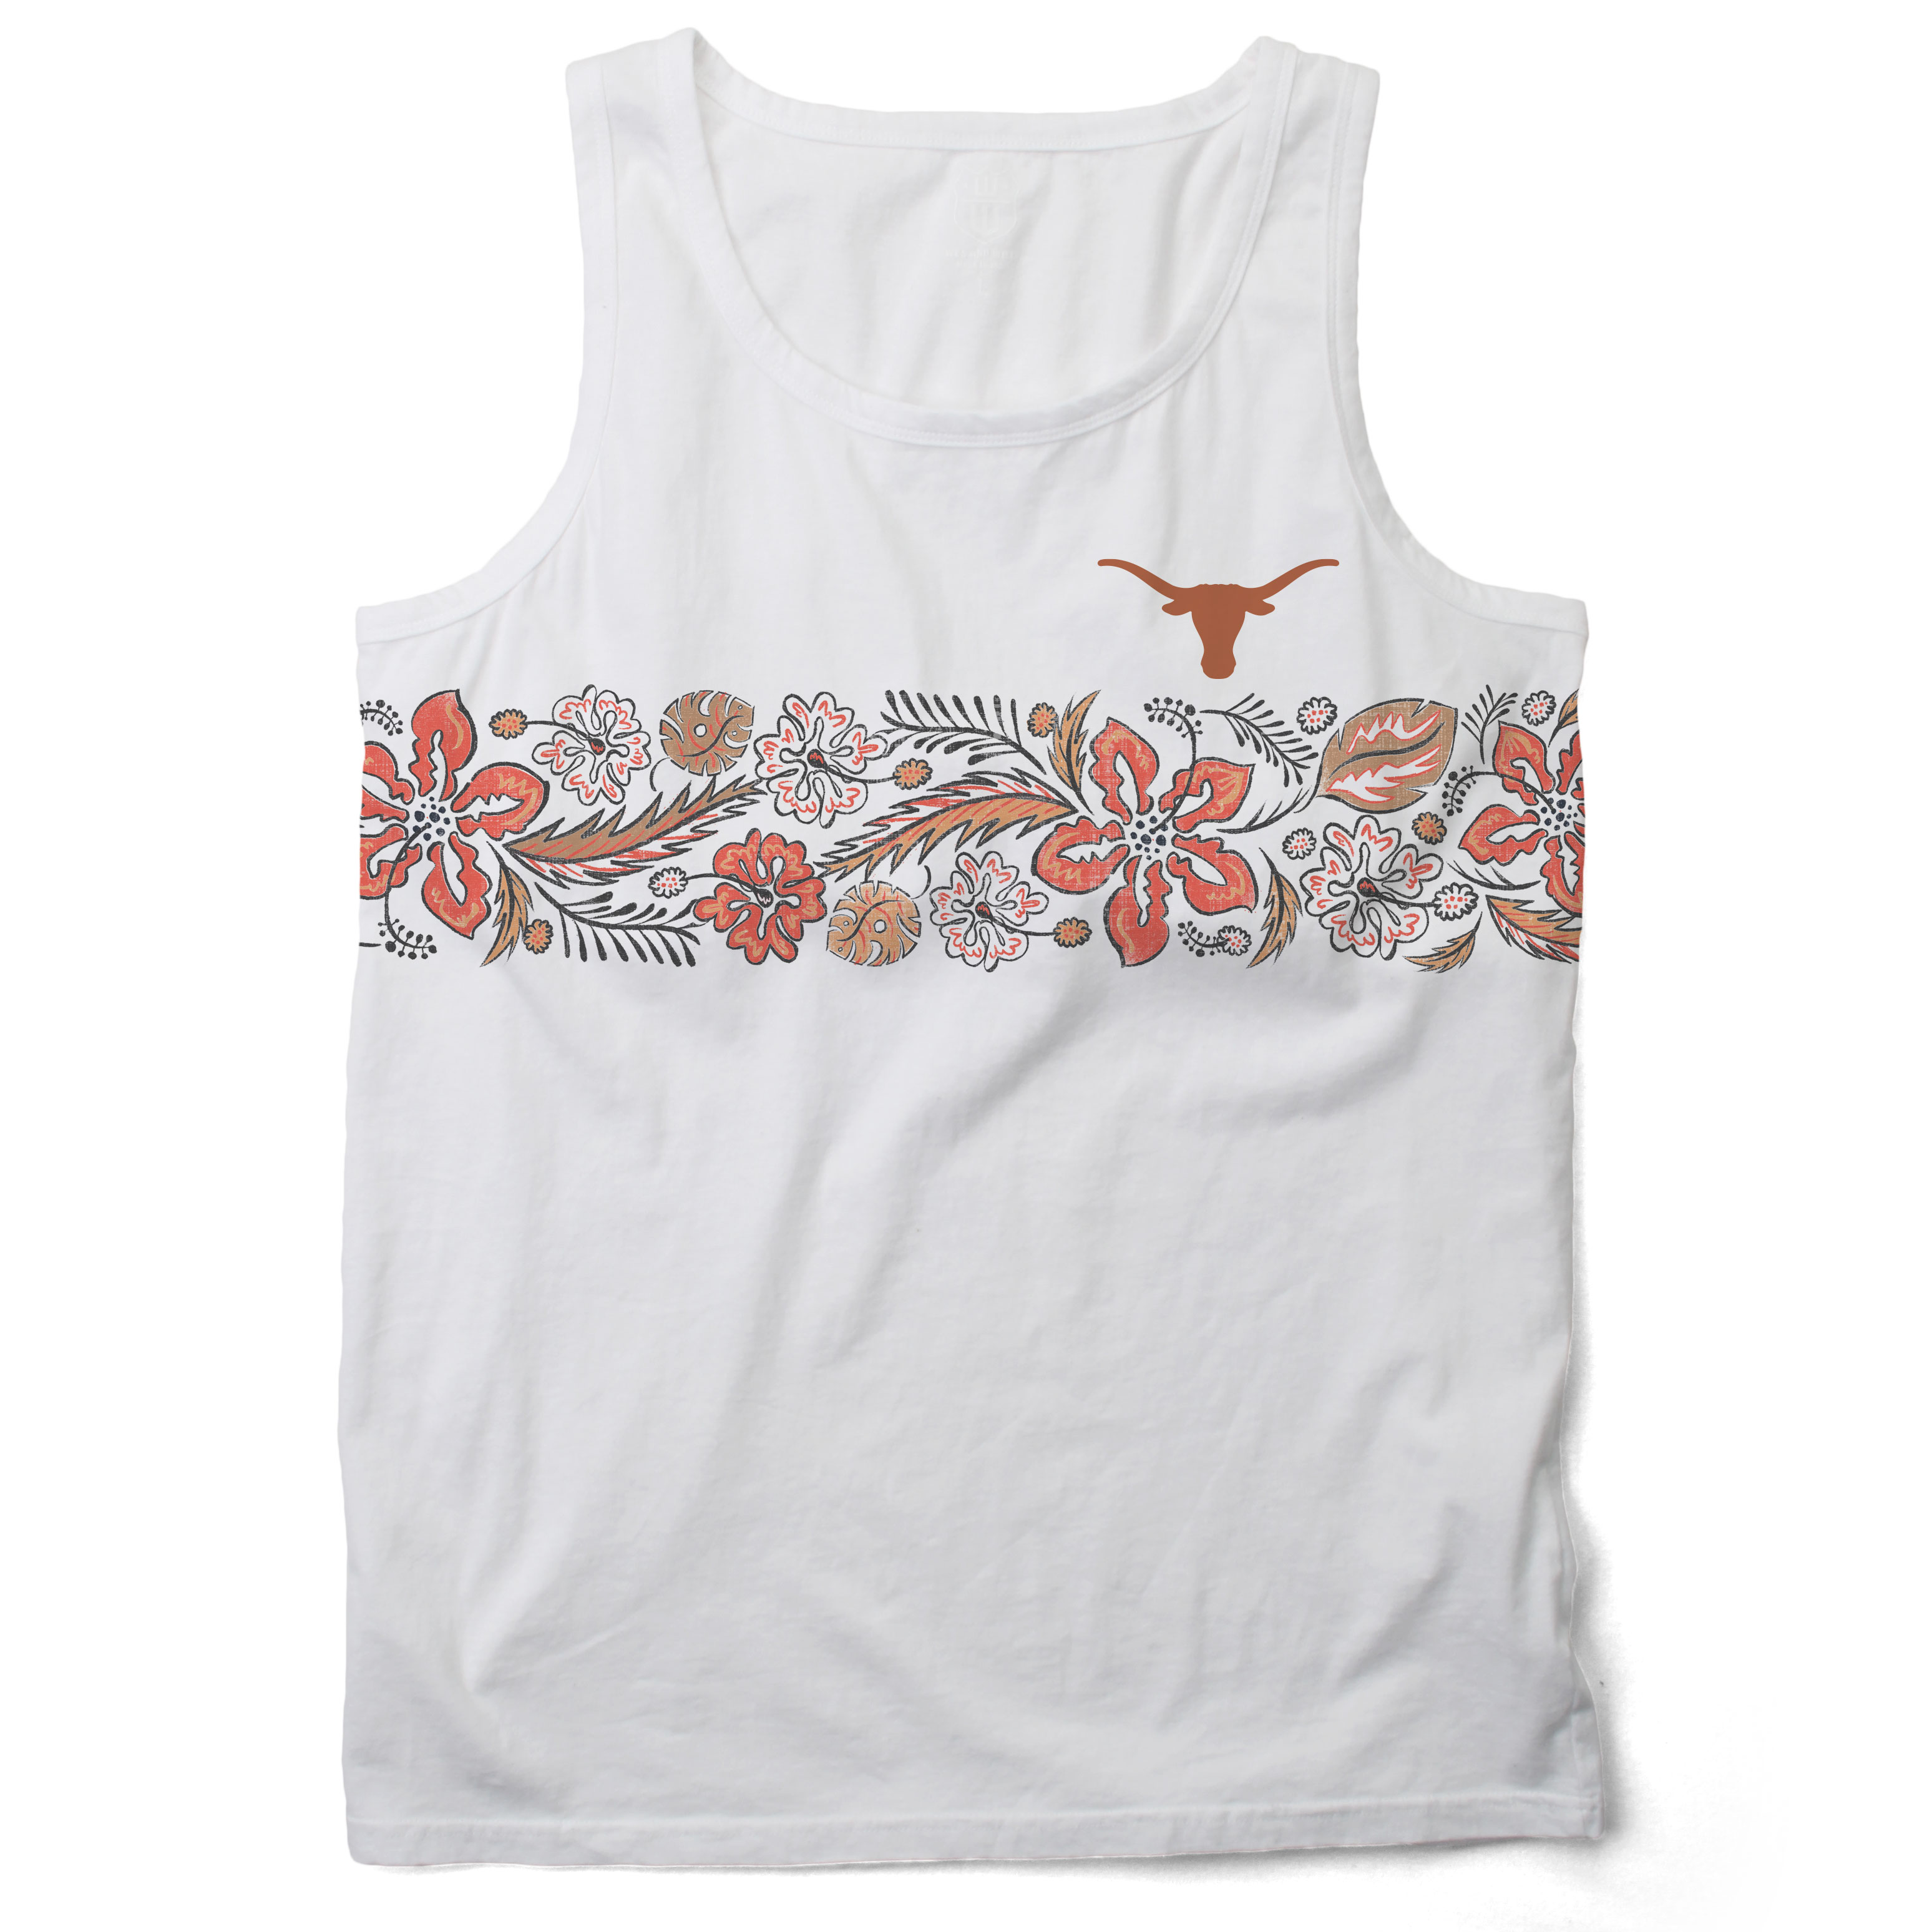 Wes And Willy Texas Longhorns Mens Floral Tank Top